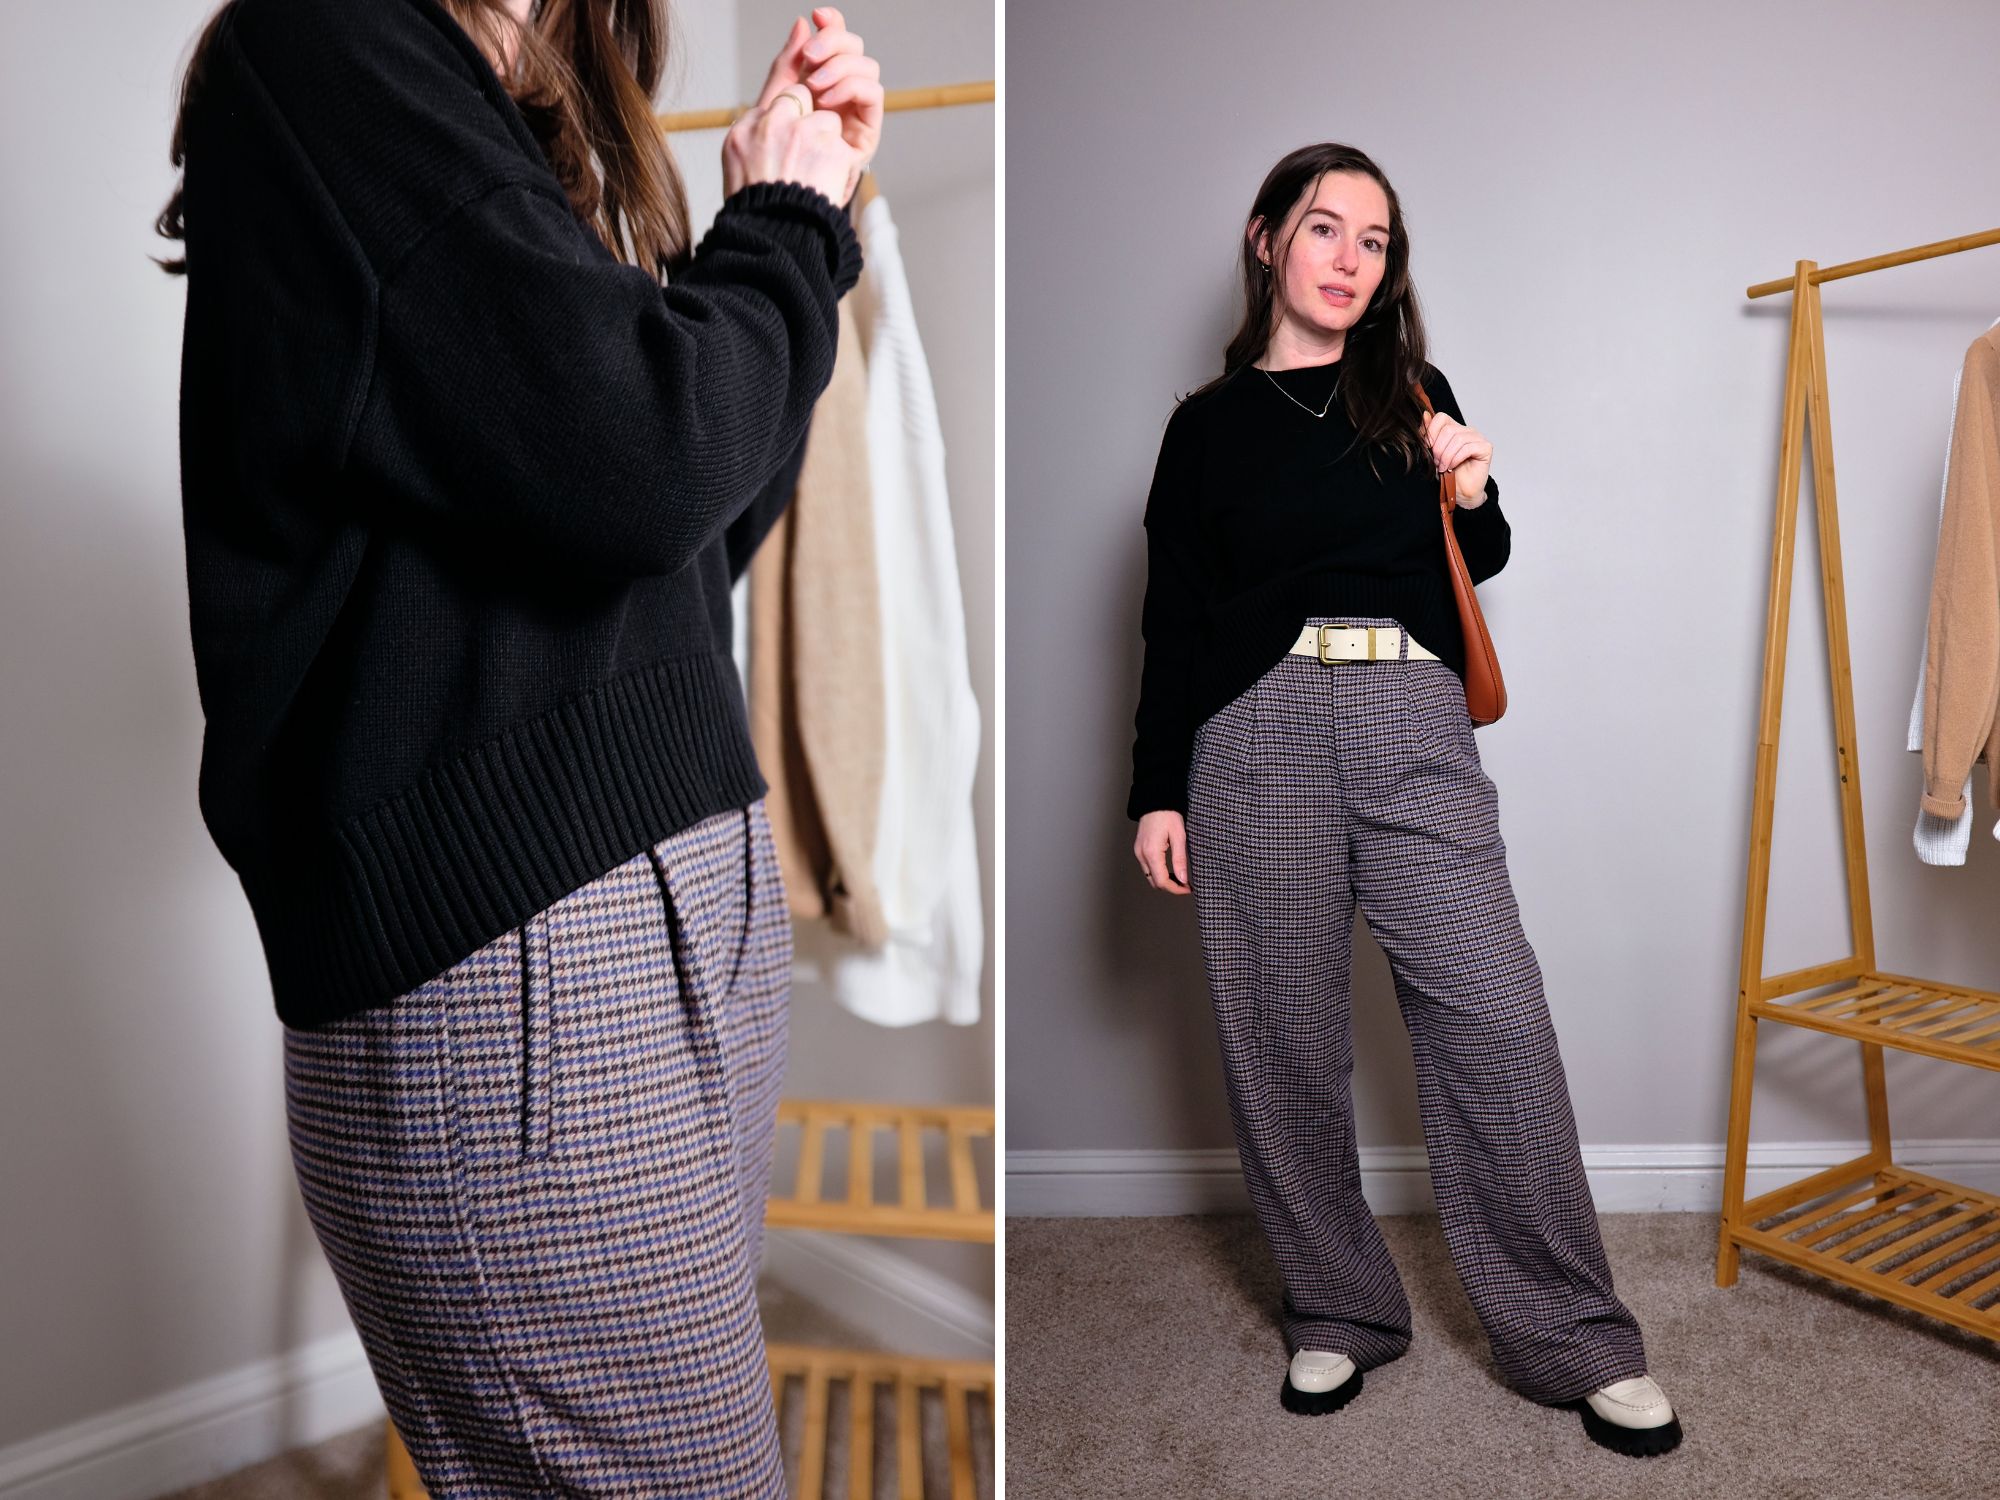 Quince womenswear review: Cashmere sweater and pants, neoprene belt bag -  Reviewed